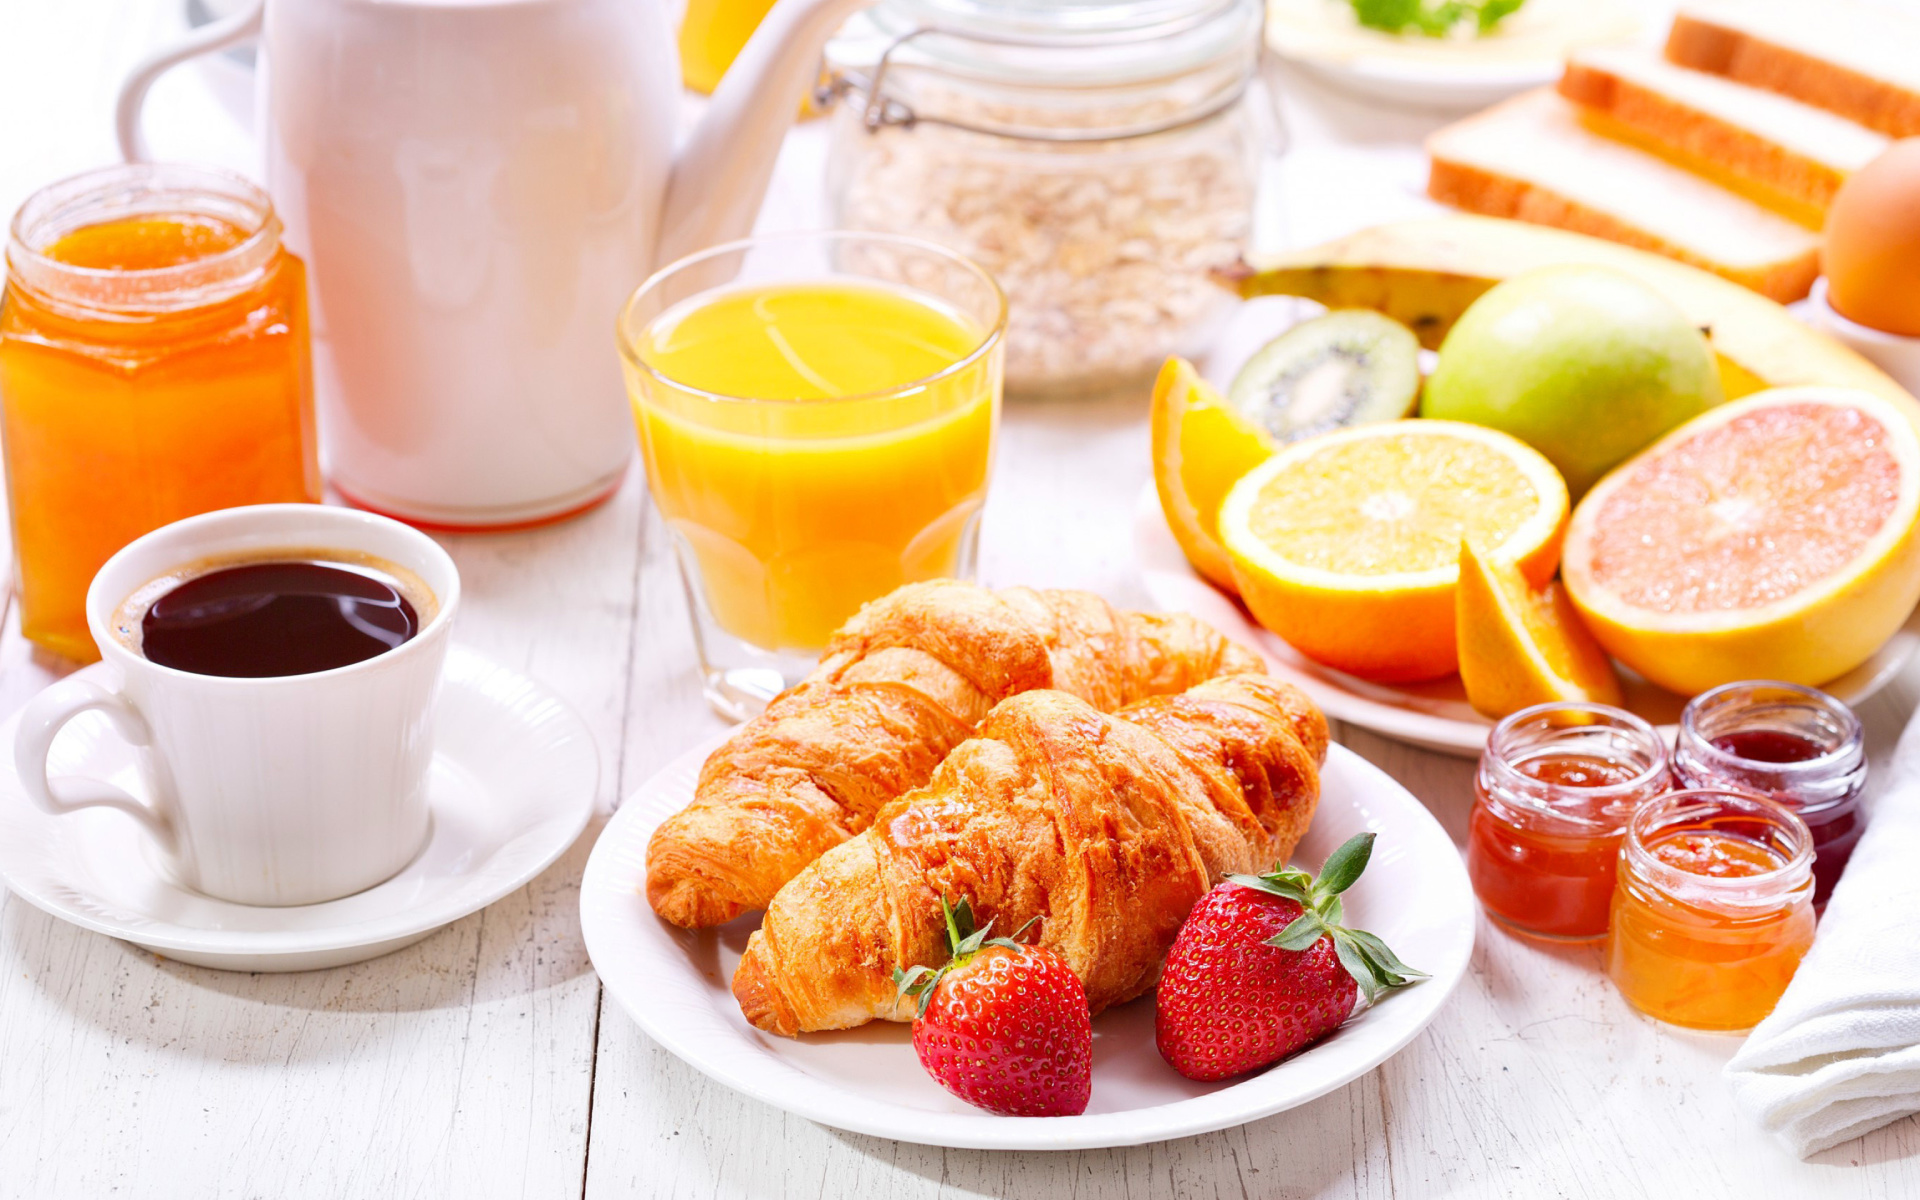 Breakfast with croissants and fruit screenshot #1 1920x1200